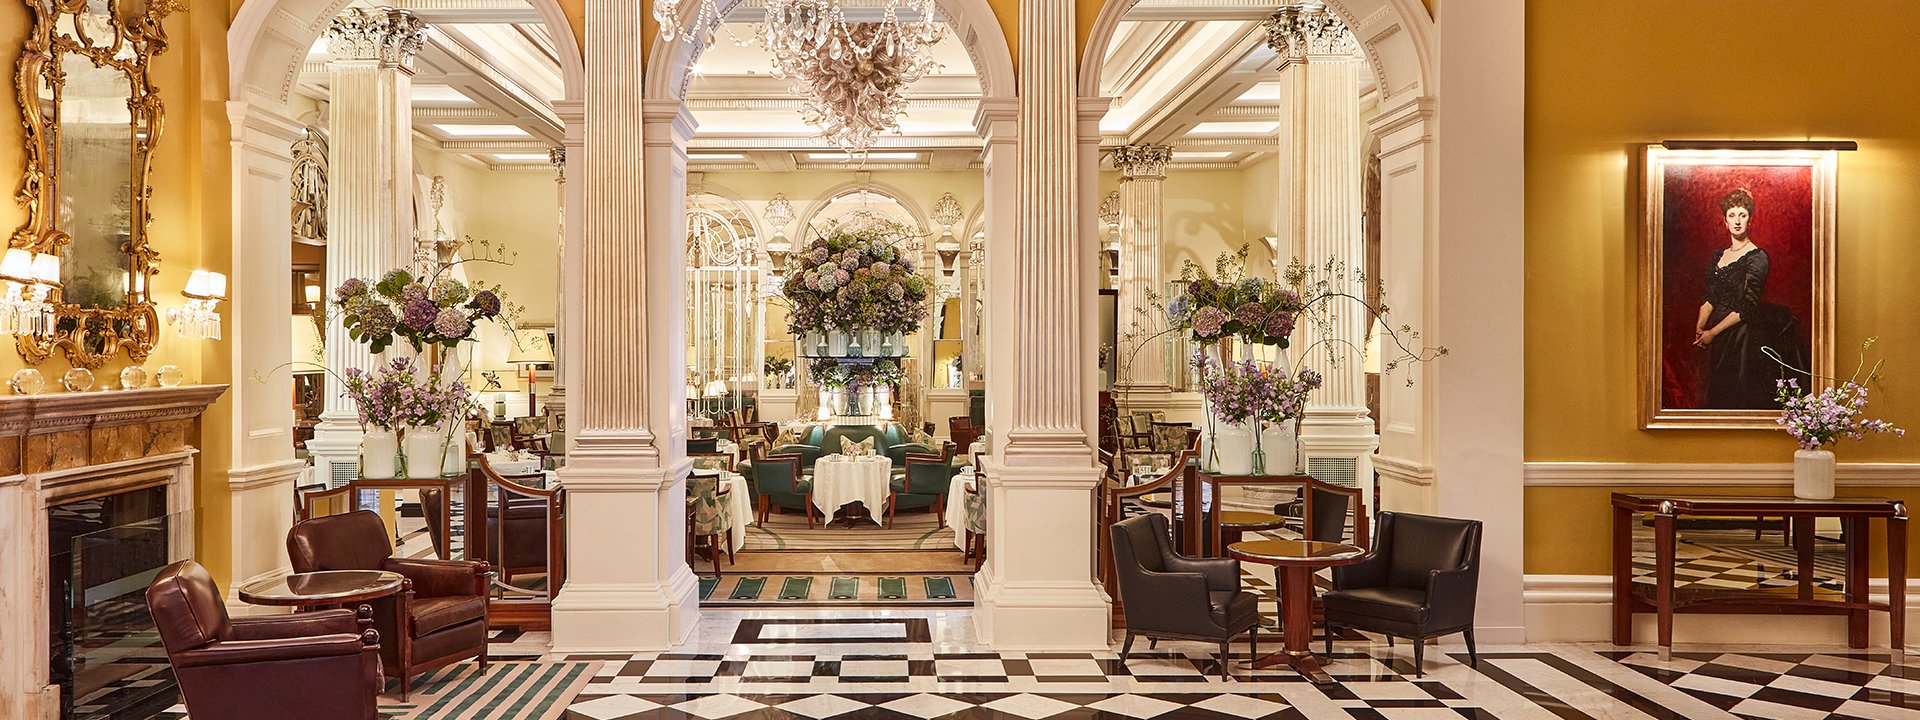 Claridge's Lobby with view on the famous black and white floor, art on the wall and open on the Foyer & Reading Room.